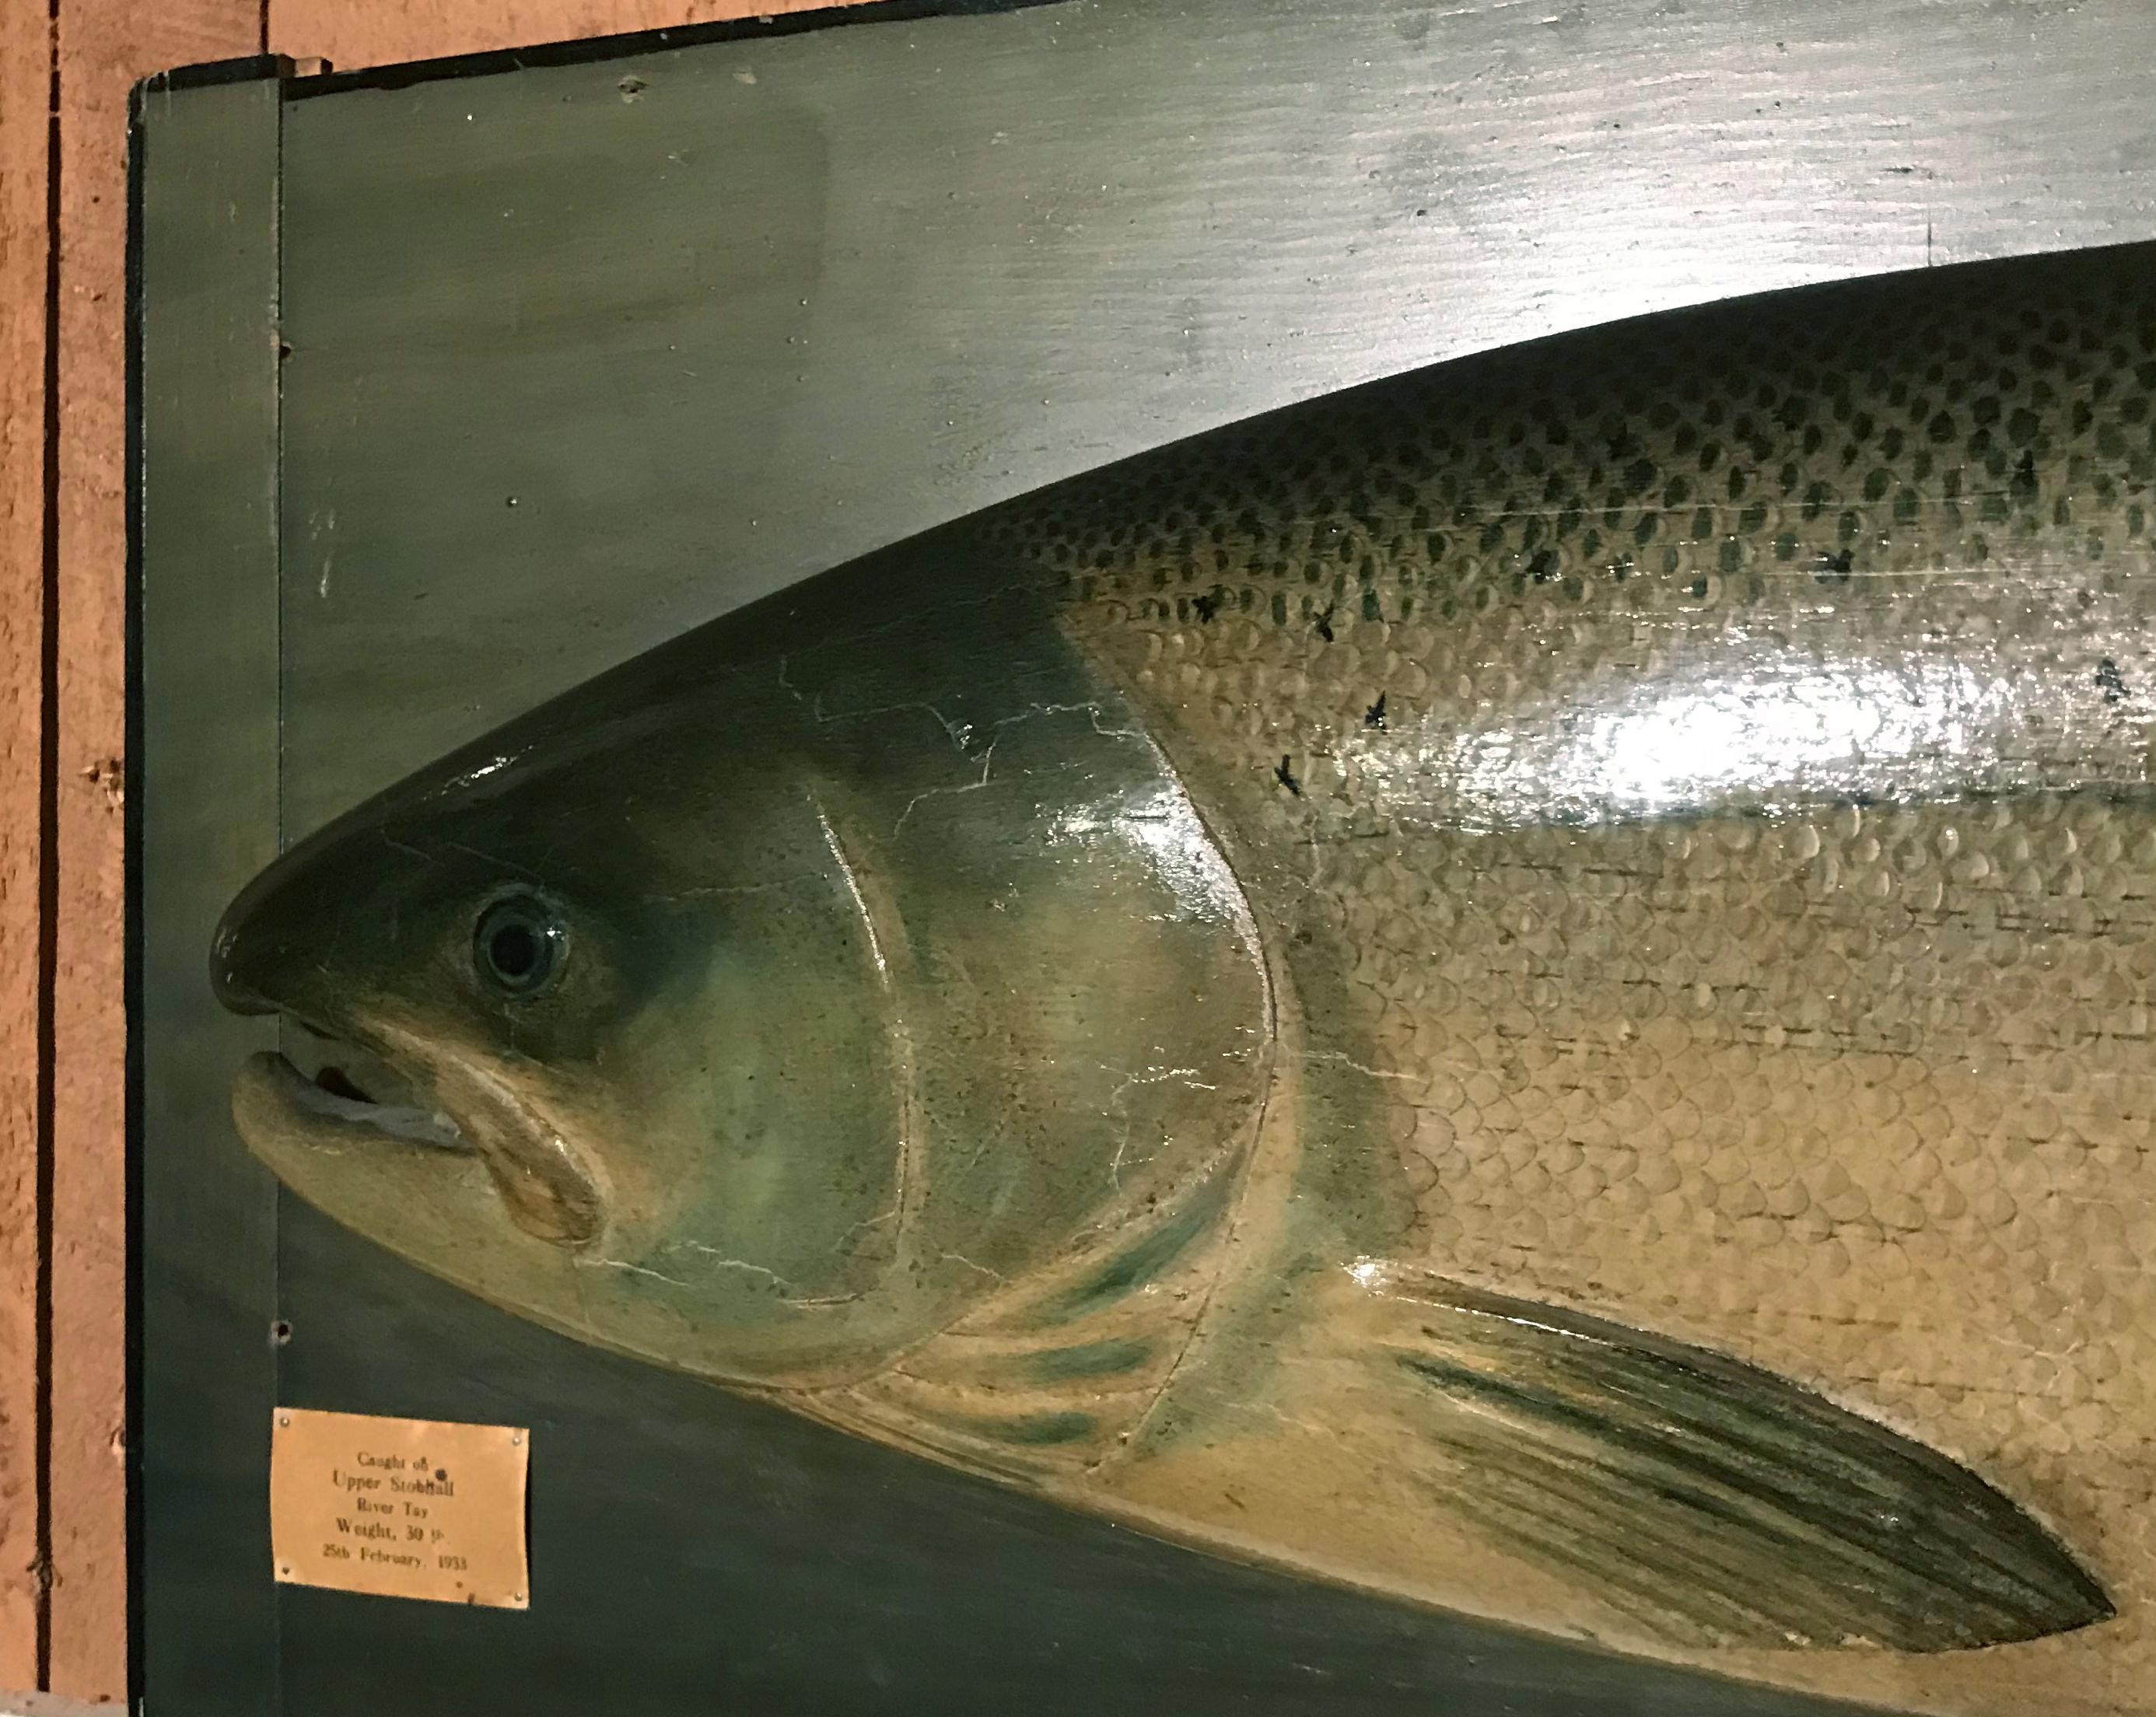 This is an exact model of a 30 pound salmon caught in 1933 in the famous Upper Stobhall Beat on the river Tay by the renowned firm of P.D. Malloch, a famous old time tackle shop in Perth which employed Scottish model makers who would create exact